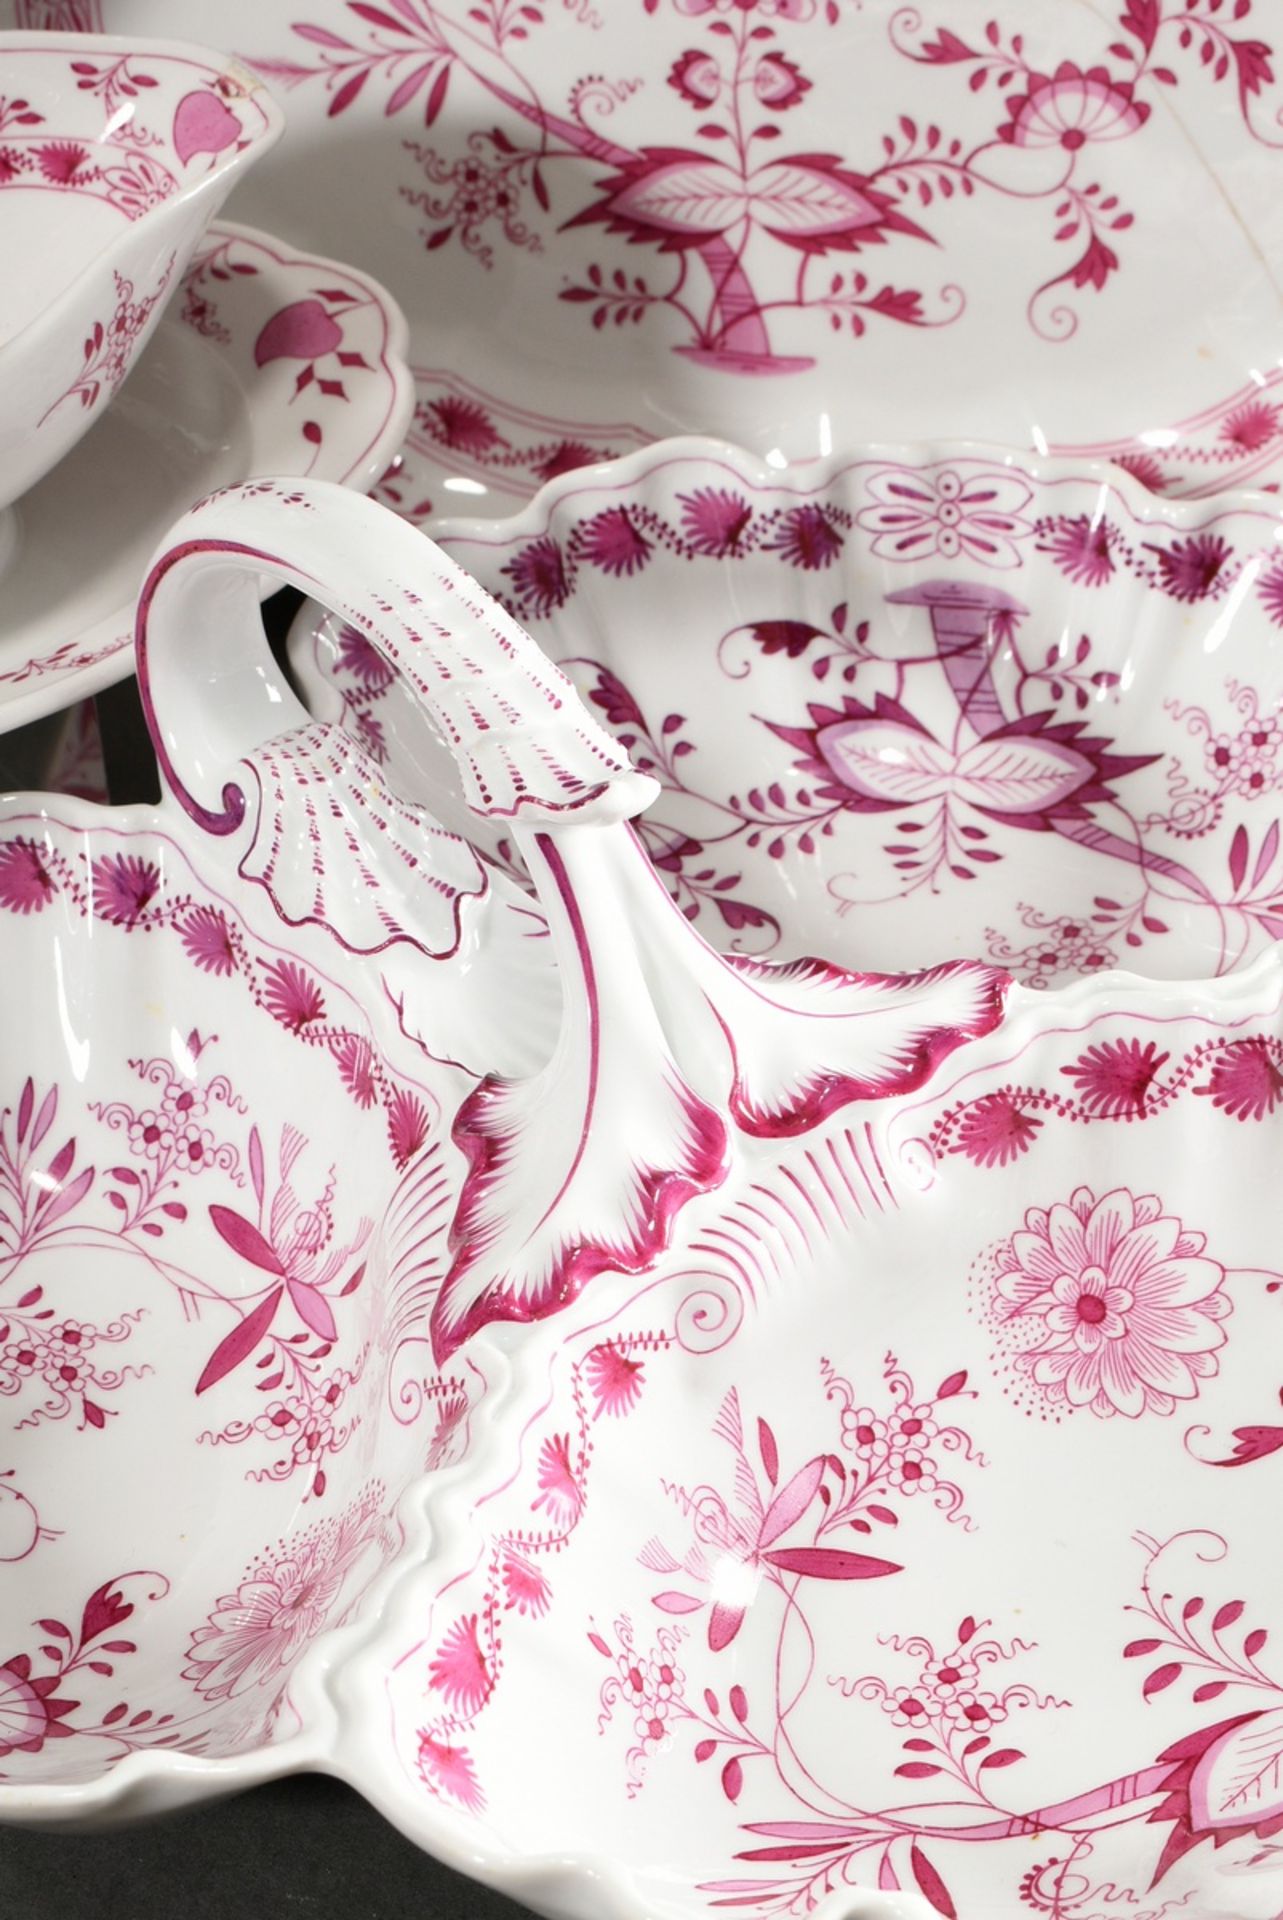 65 Pieces rare Meissen dinner service "Zwiebelmuster Pink", custom made around 1900, consisting of: - Image 12 of 27